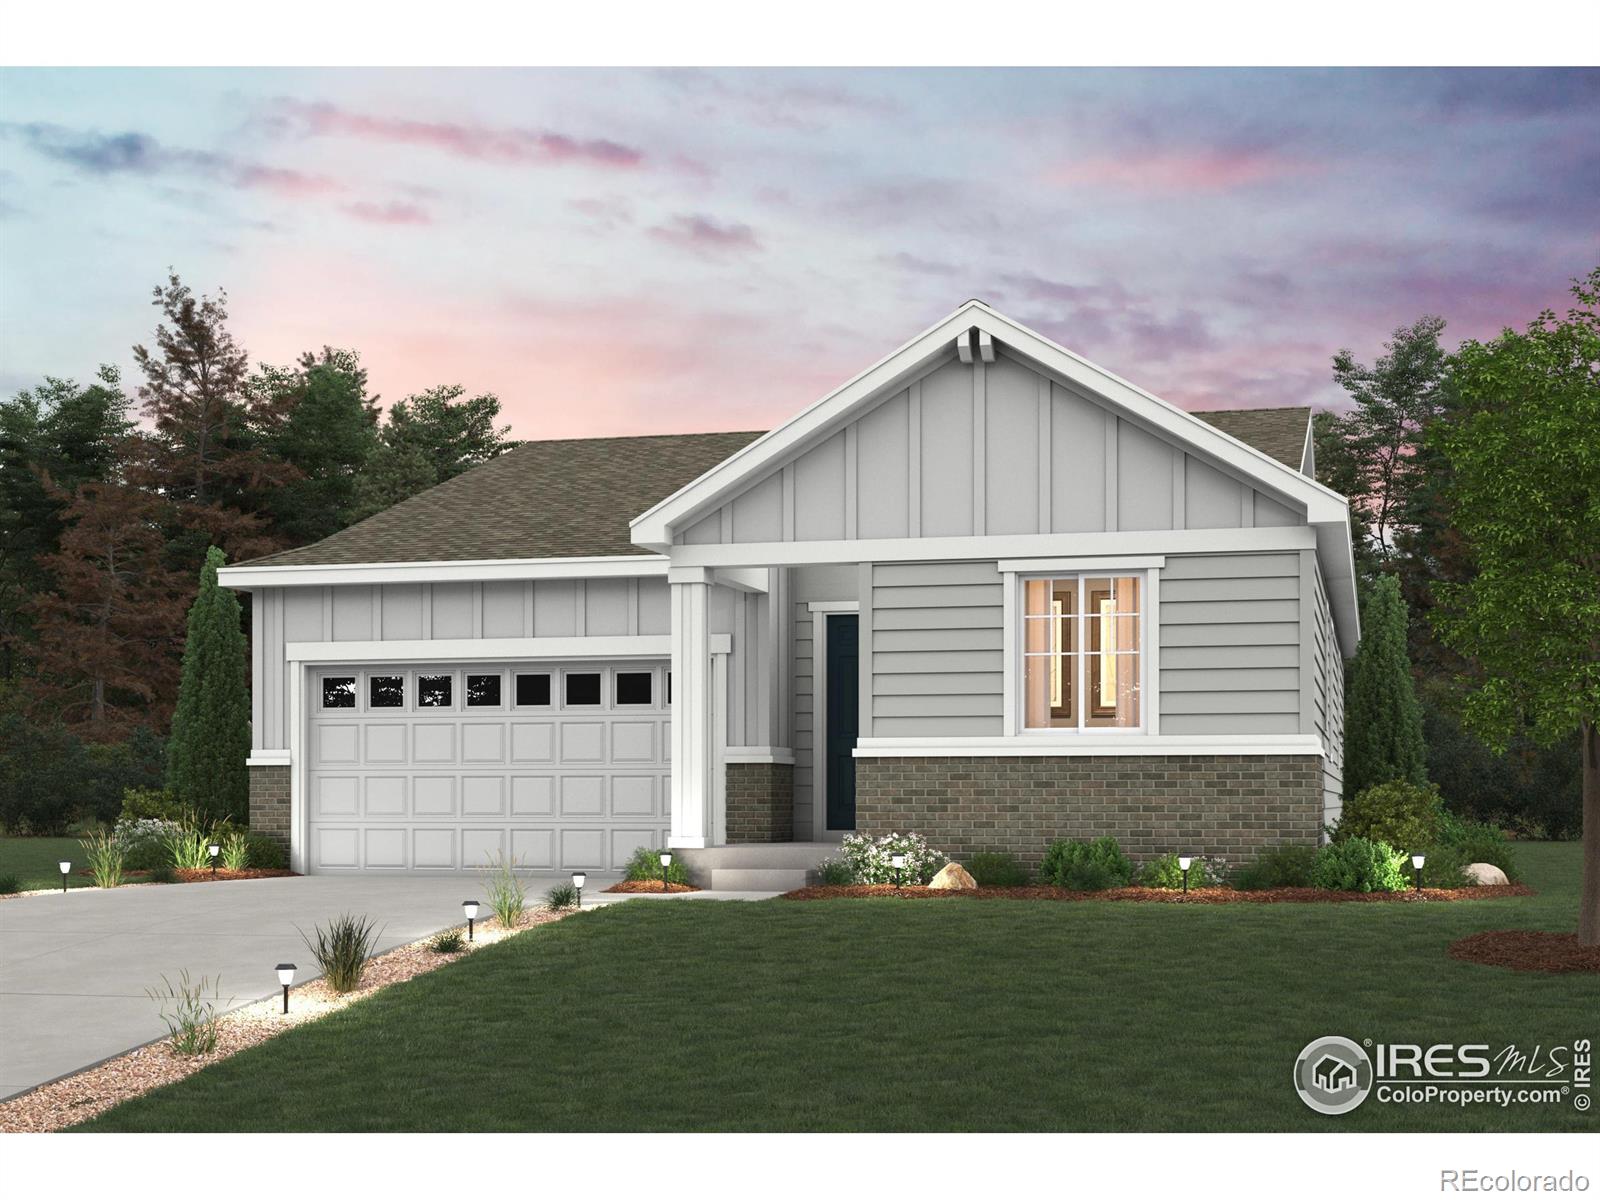 Report Image for 829  Hummocky Way,Windsor, Colorado